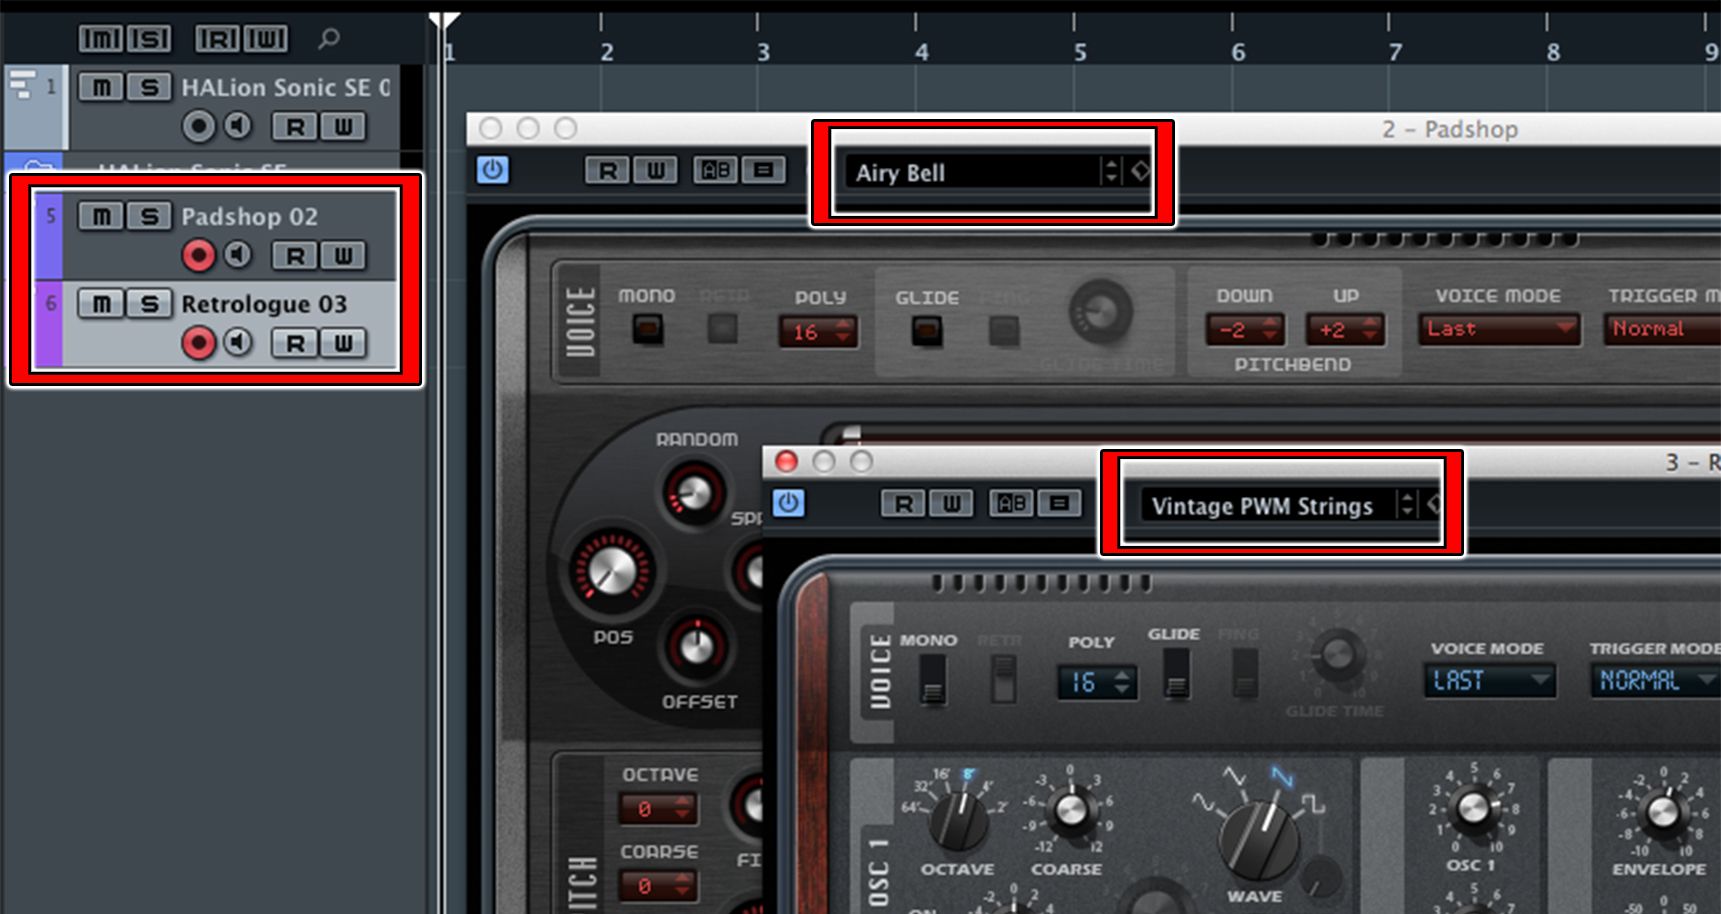 The MIDI tracks (record-enabled) and control panels (overlapping) for Padshop and Retrologue, sound names in boxes.